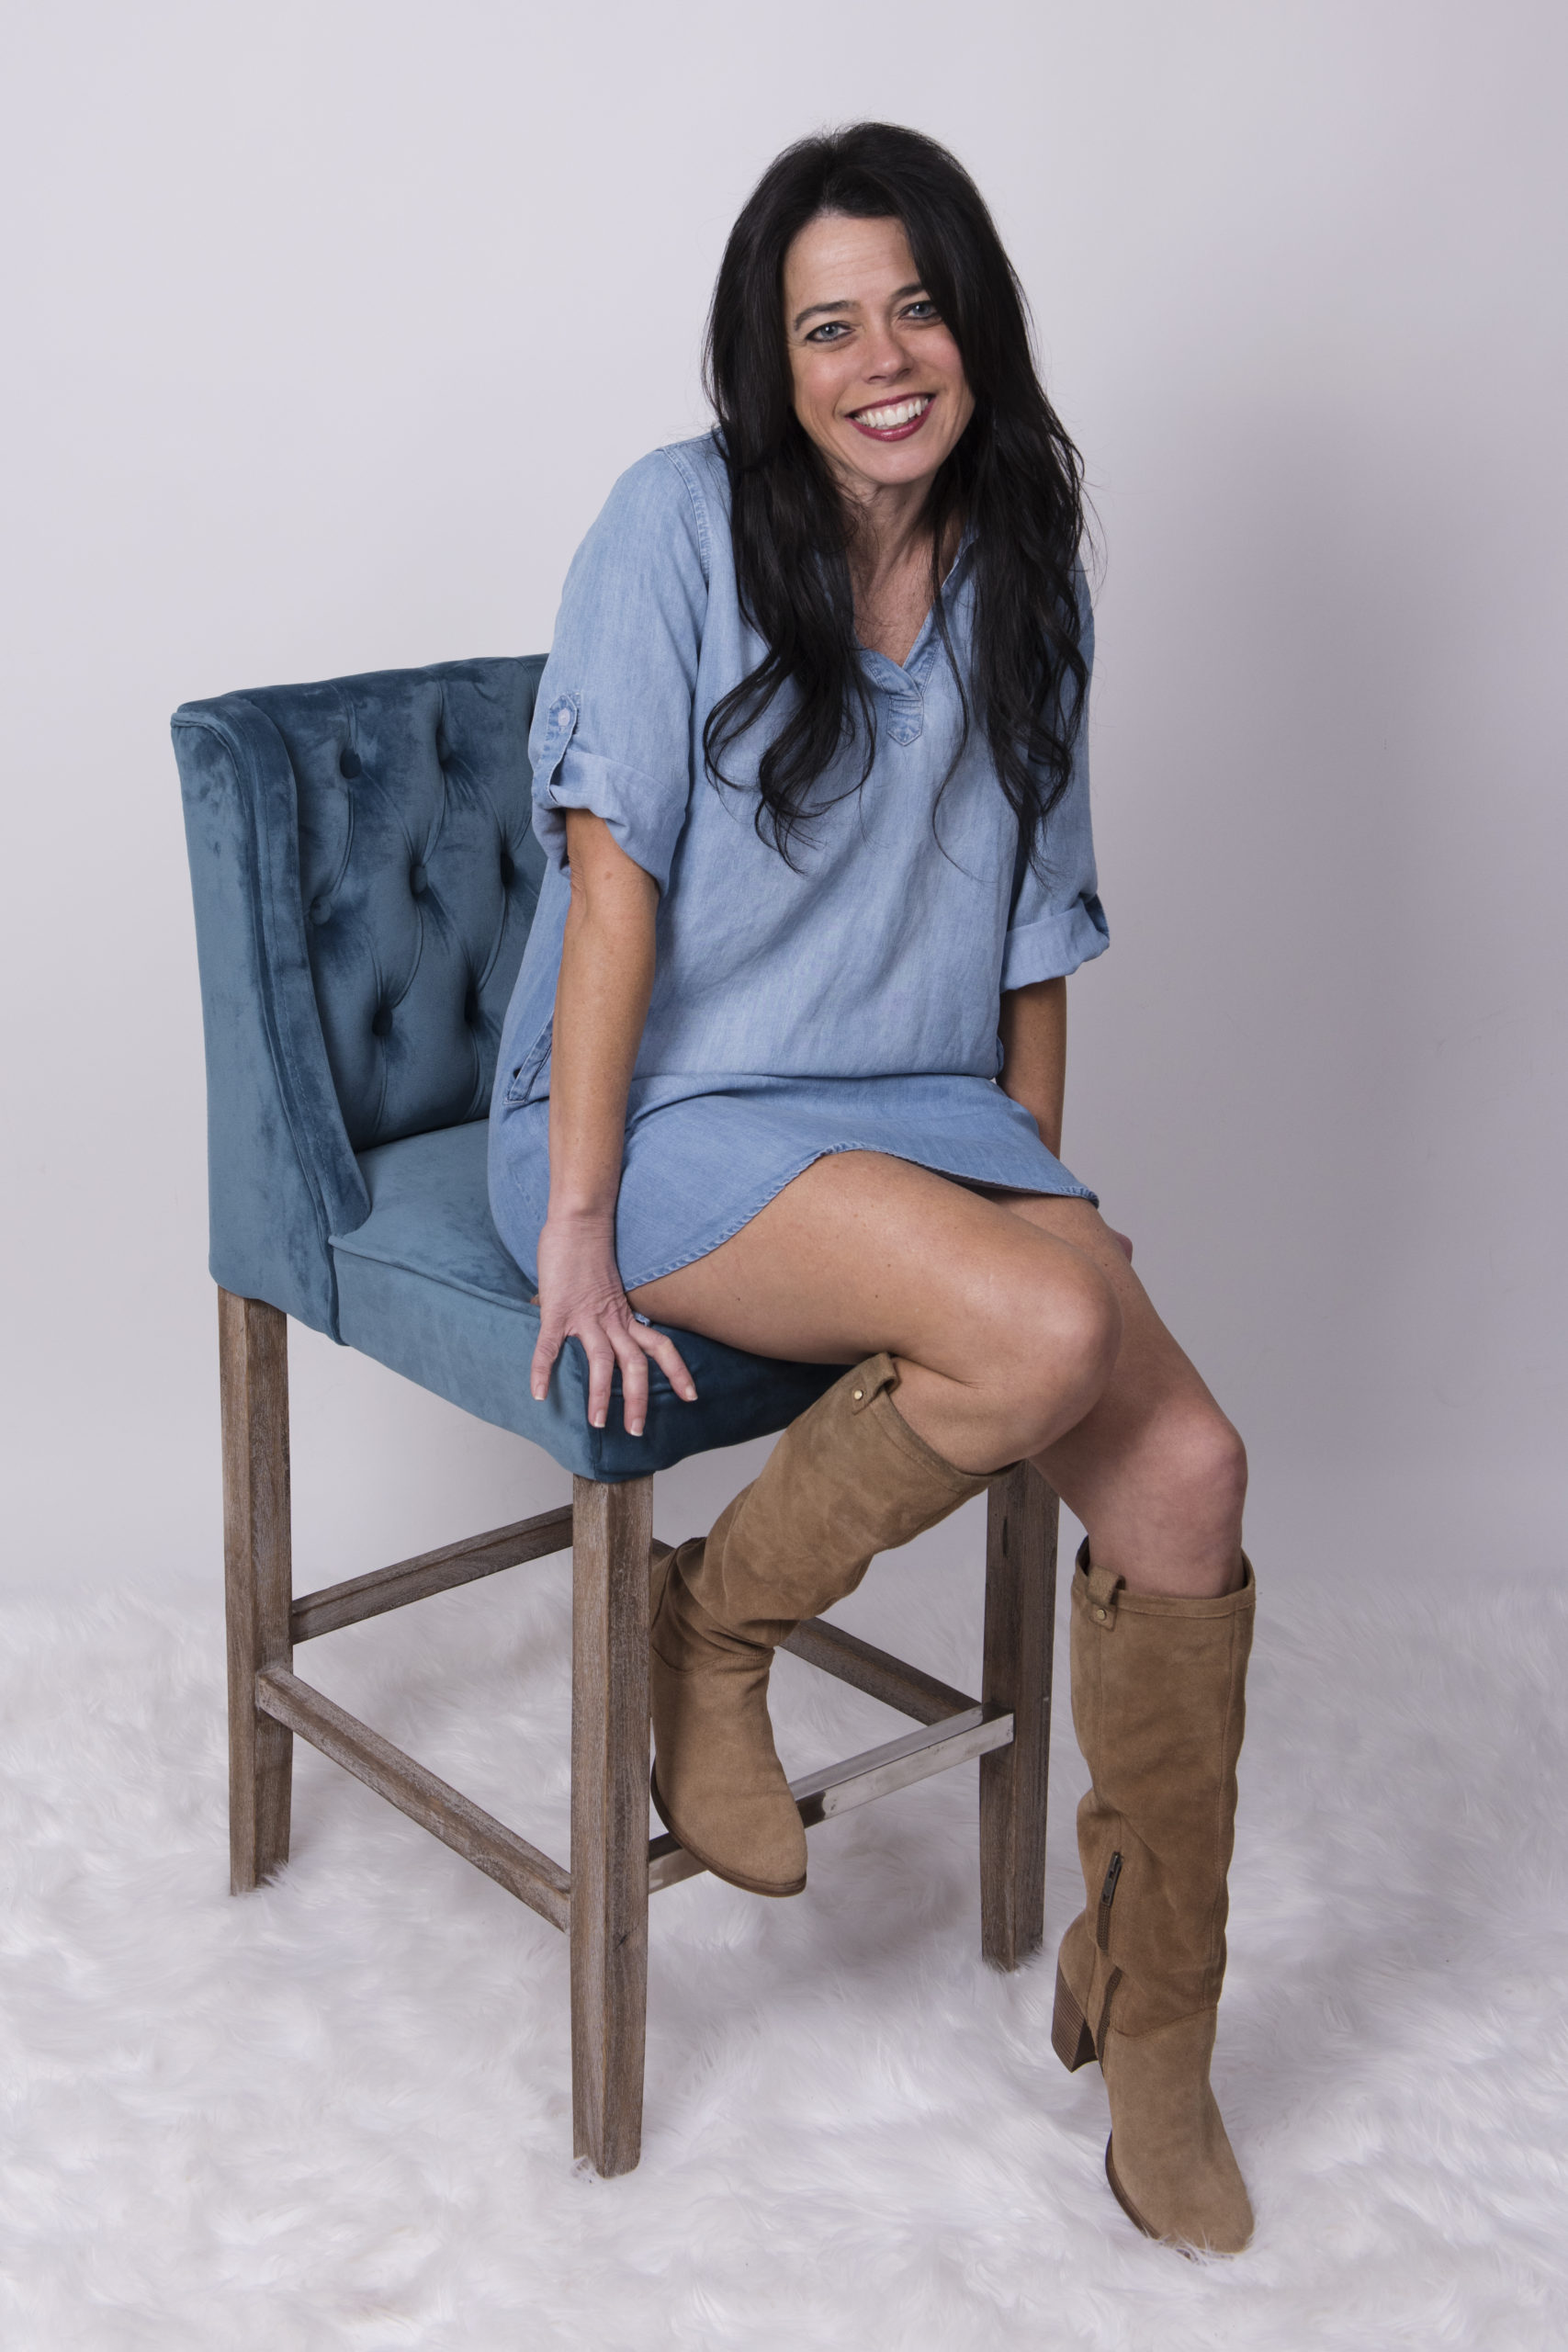 Kristin sitting on a blue chair in a blue dress with a white background